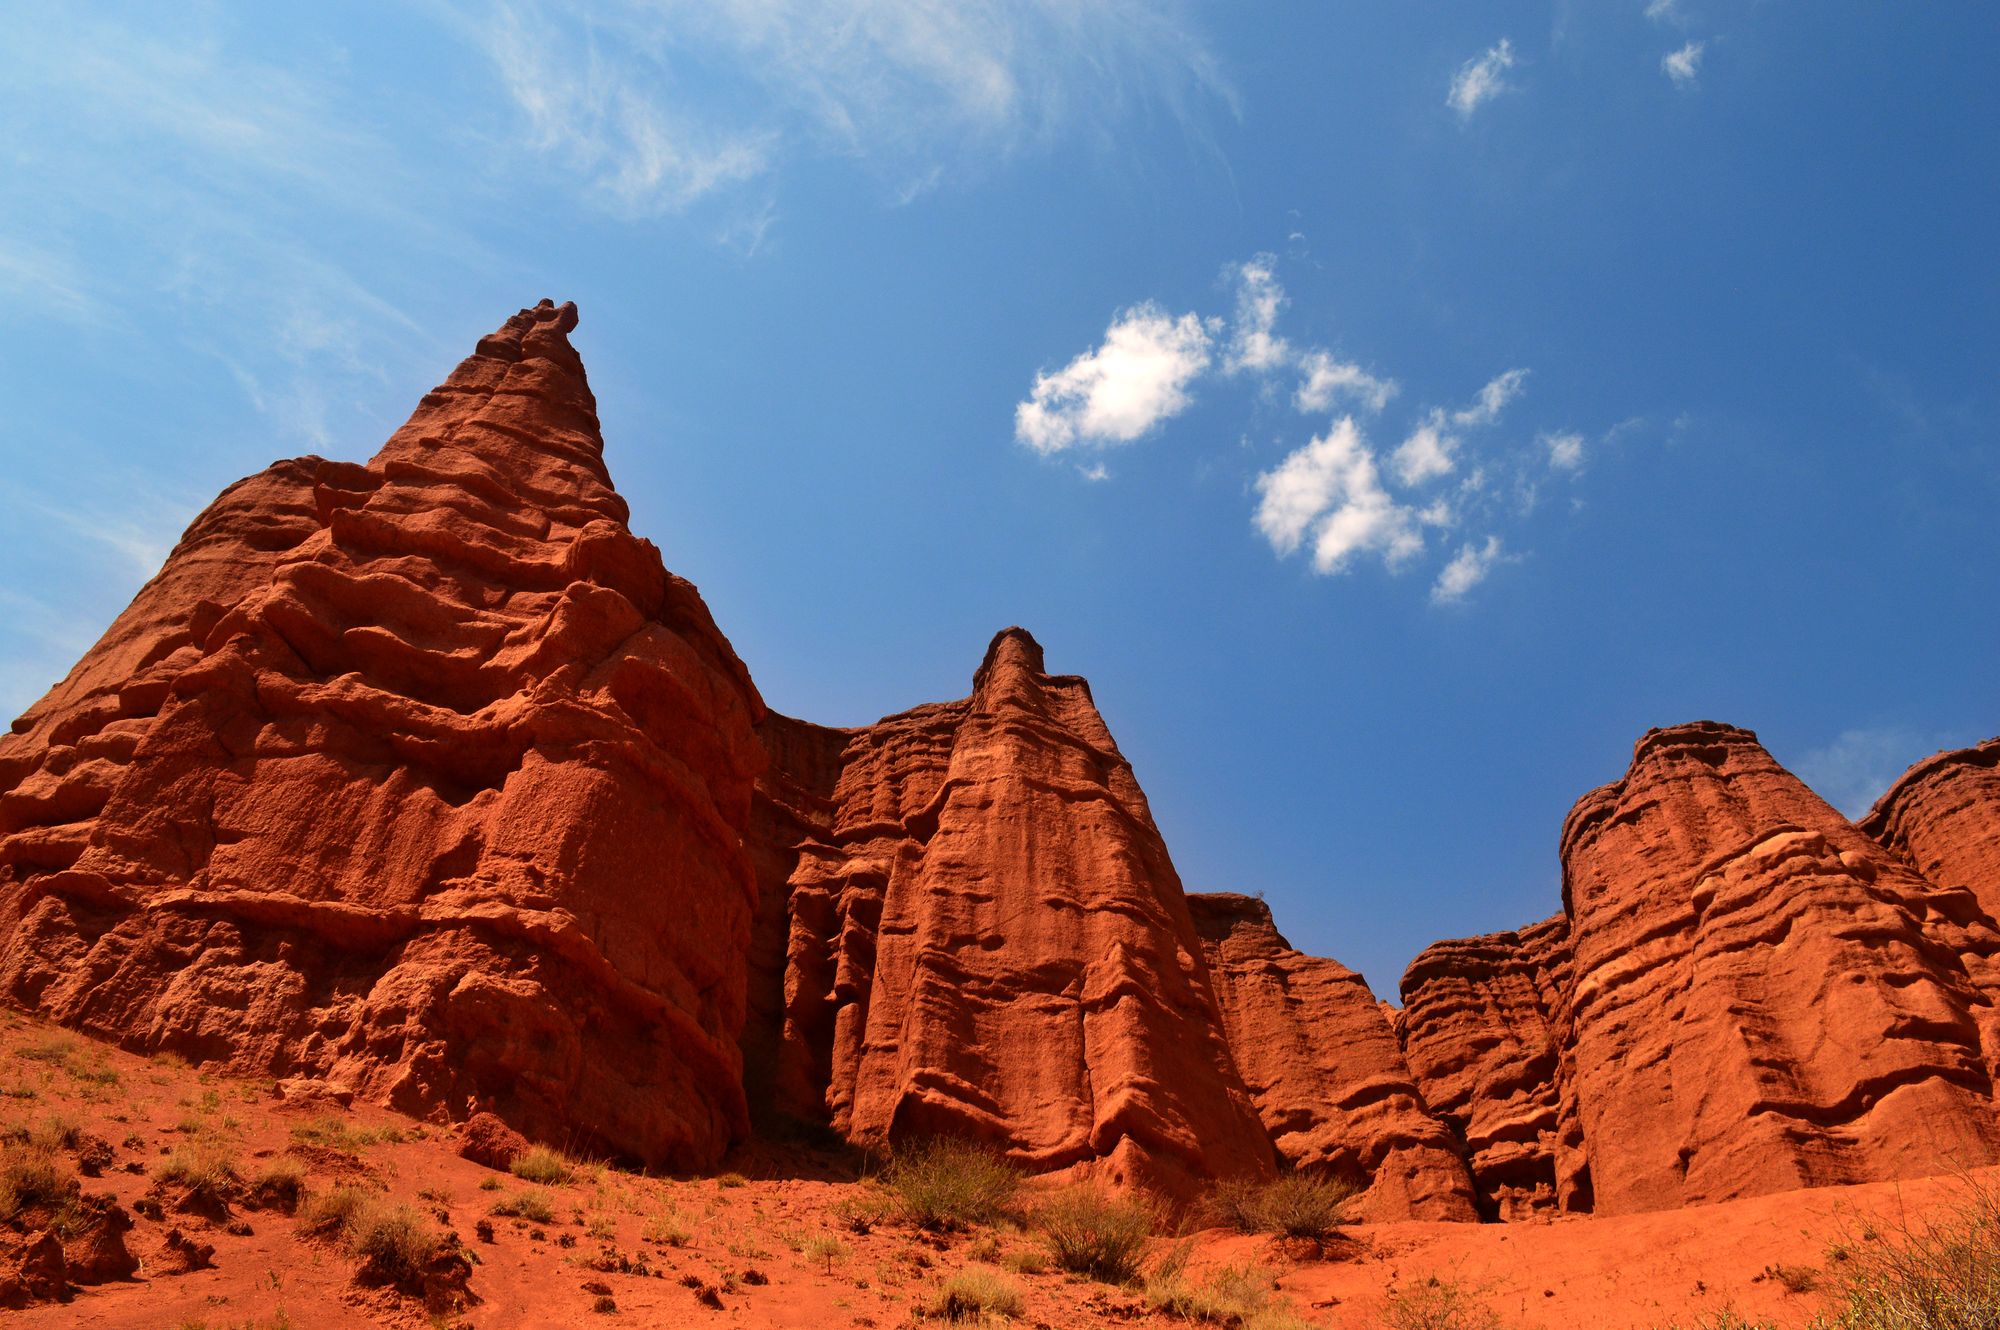 Dramatic red sandstone rock formations in Kyrgyzstan.